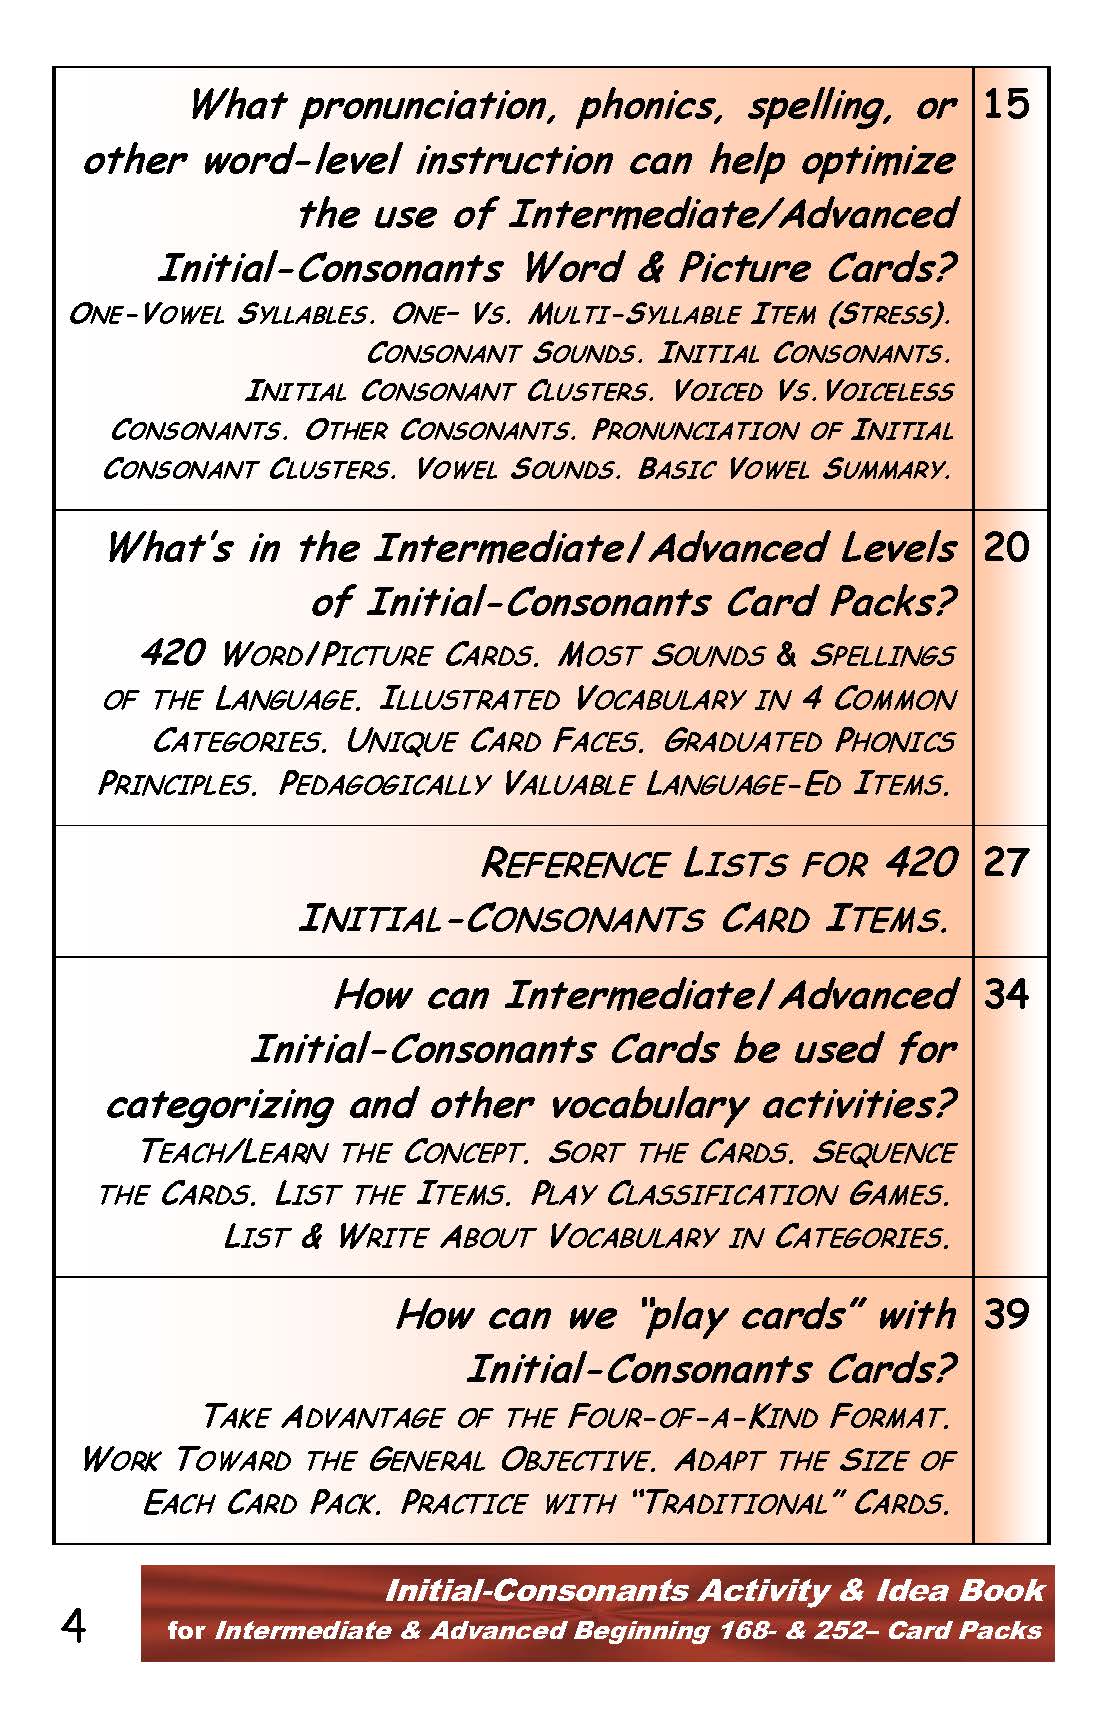 B-02.5 Get Rationale & Instructions Book for Initial-Consonants Cards - Intermediate & Advanced